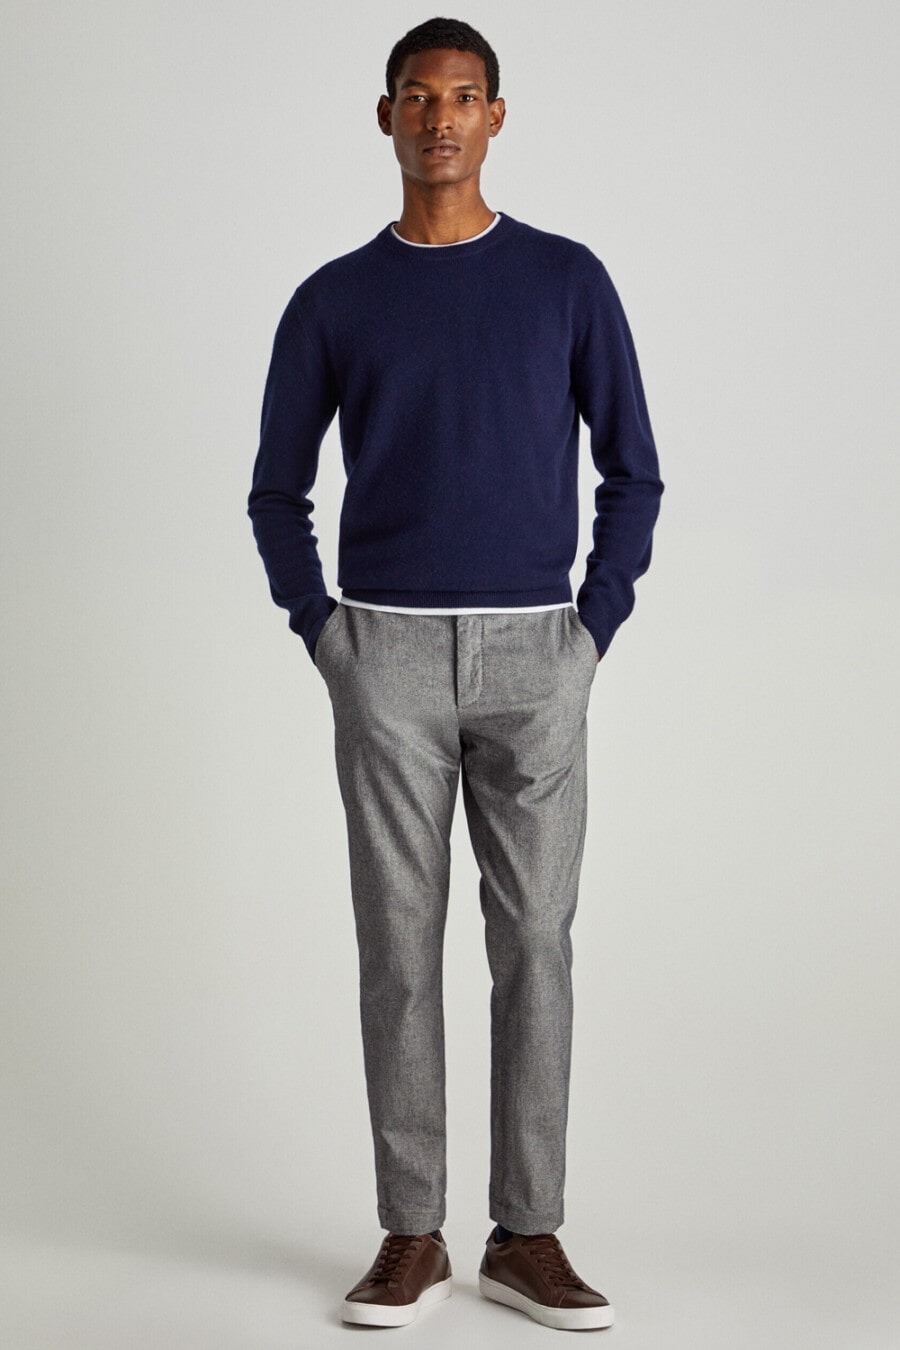 Men's grey textured pants, white T-shirt, navy crew-neck sweater and brown leather sneakers outfit